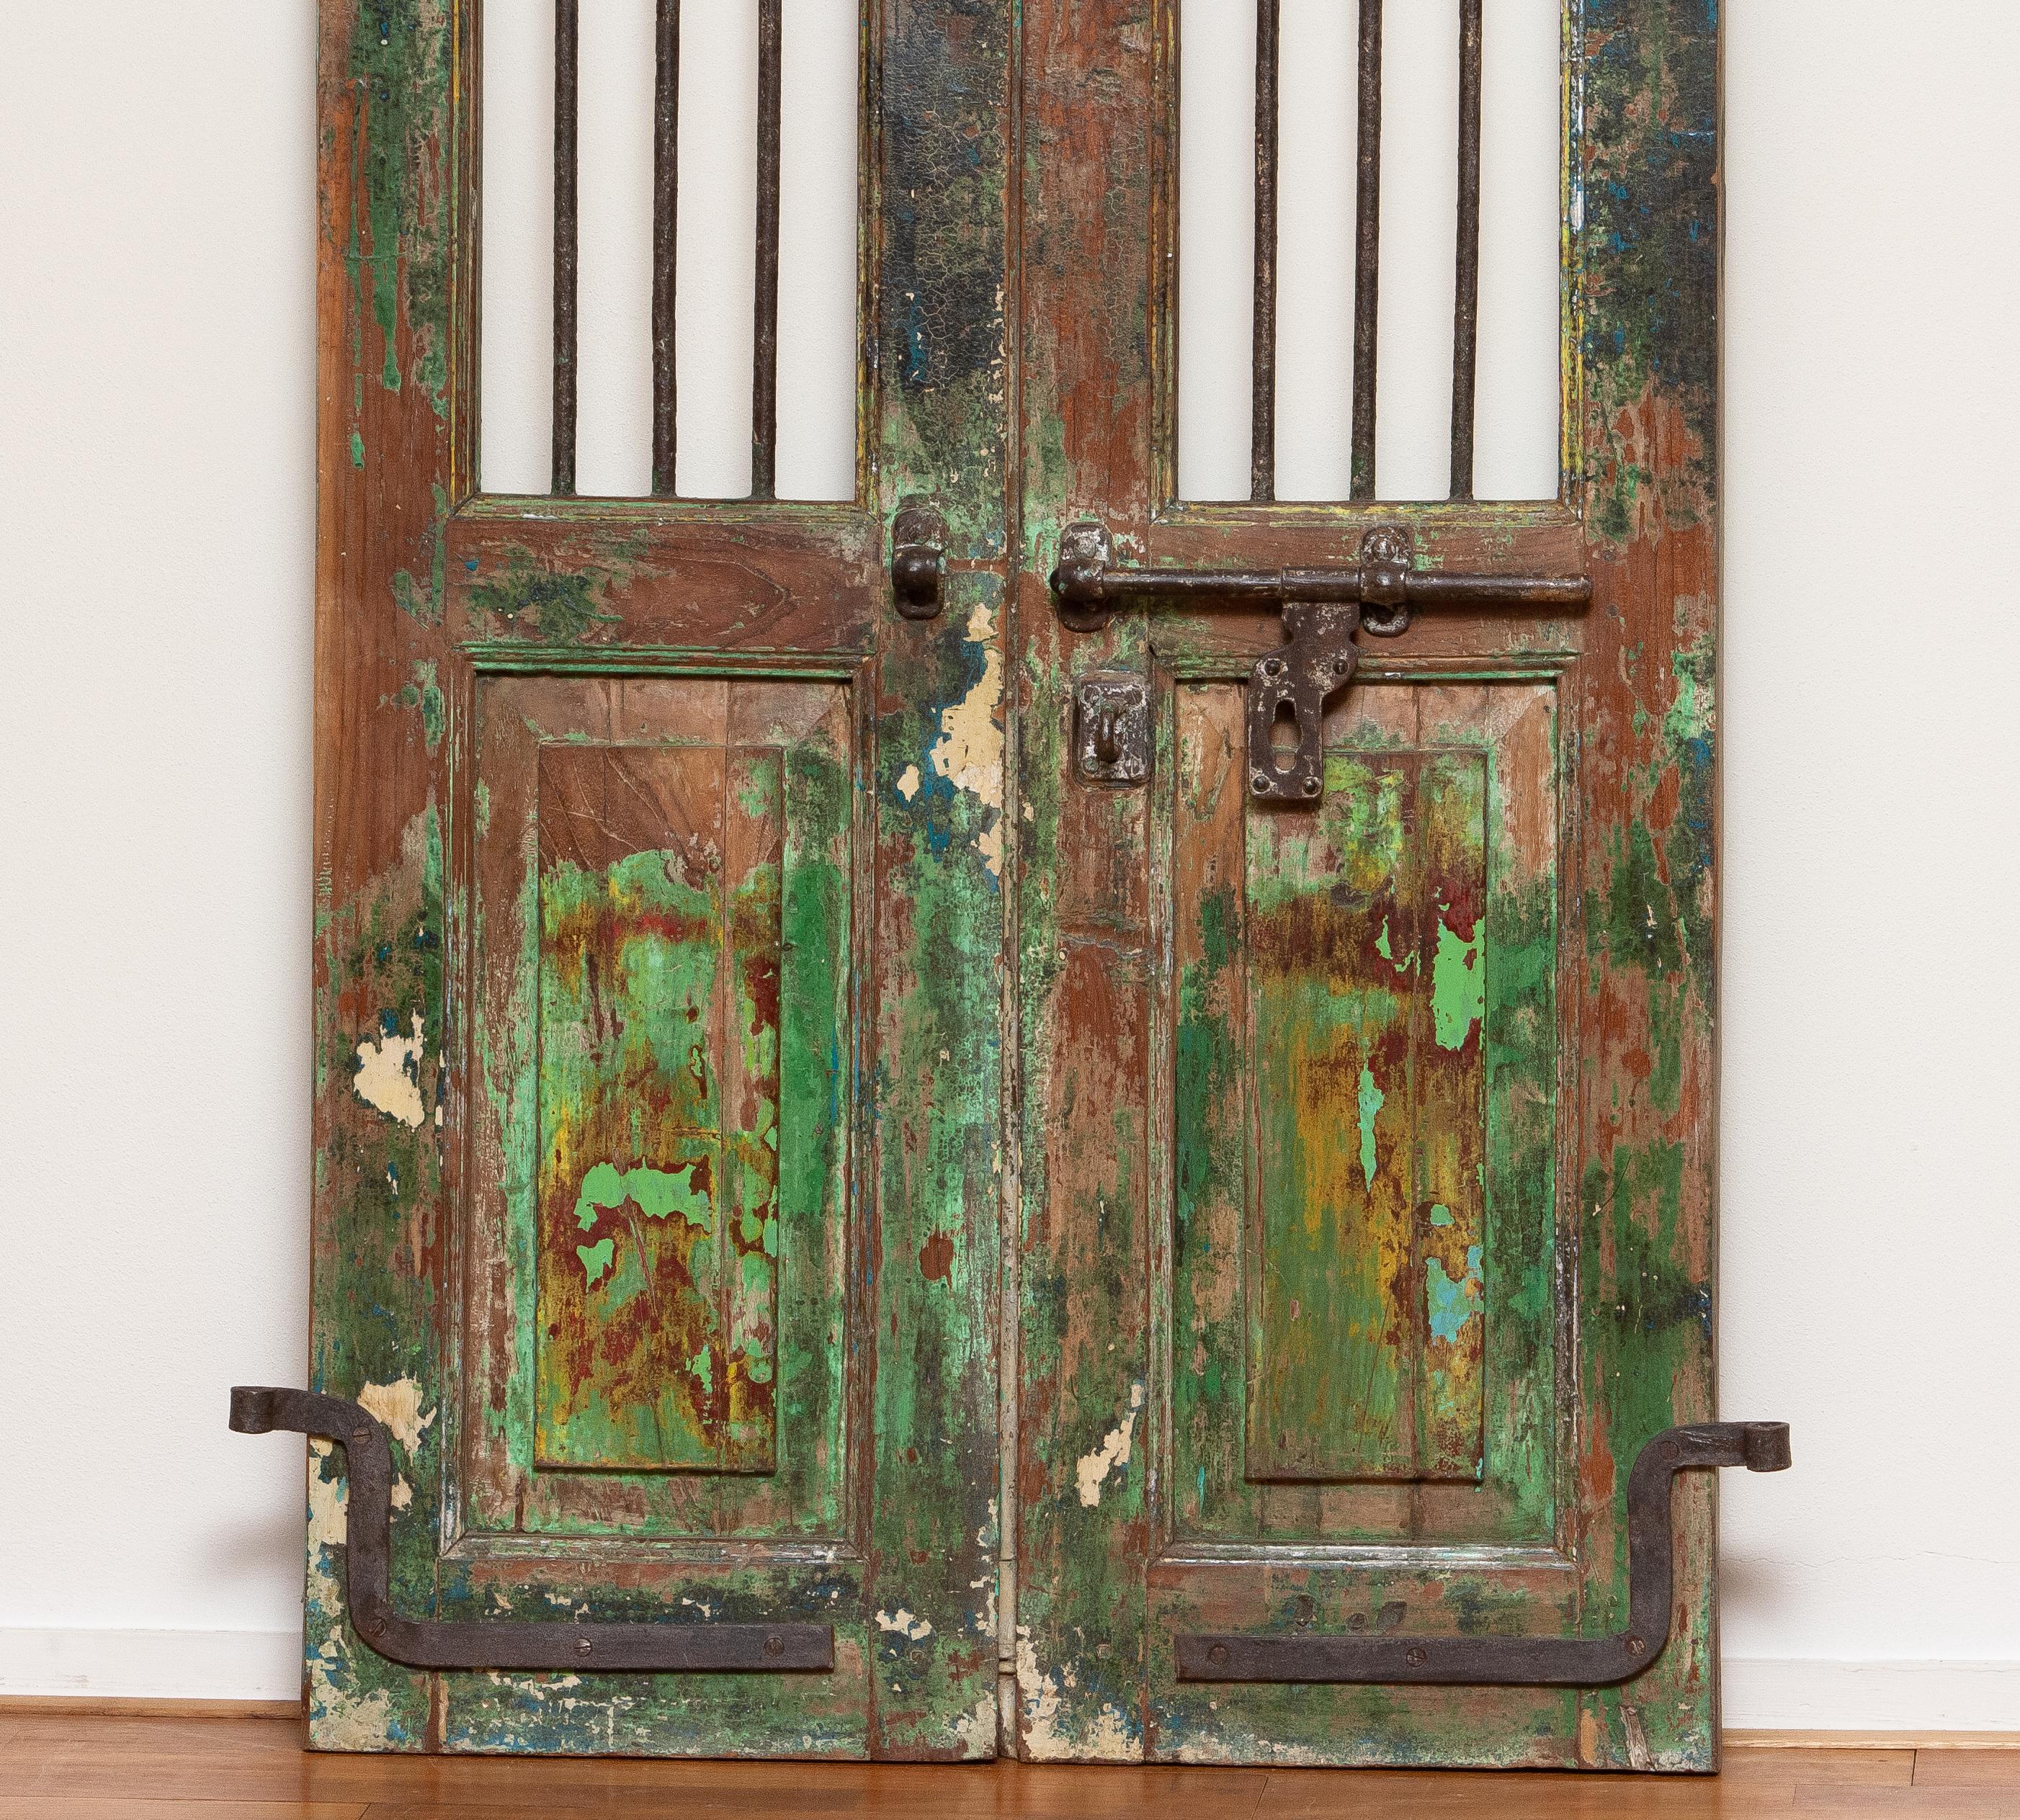 19th century Indian window or door shutters. Complete with original hangings and metal mechanism for locking. The doors have panels and above the lock mechanism each door has three steel bars. 
These doors have a great patina true the years and are